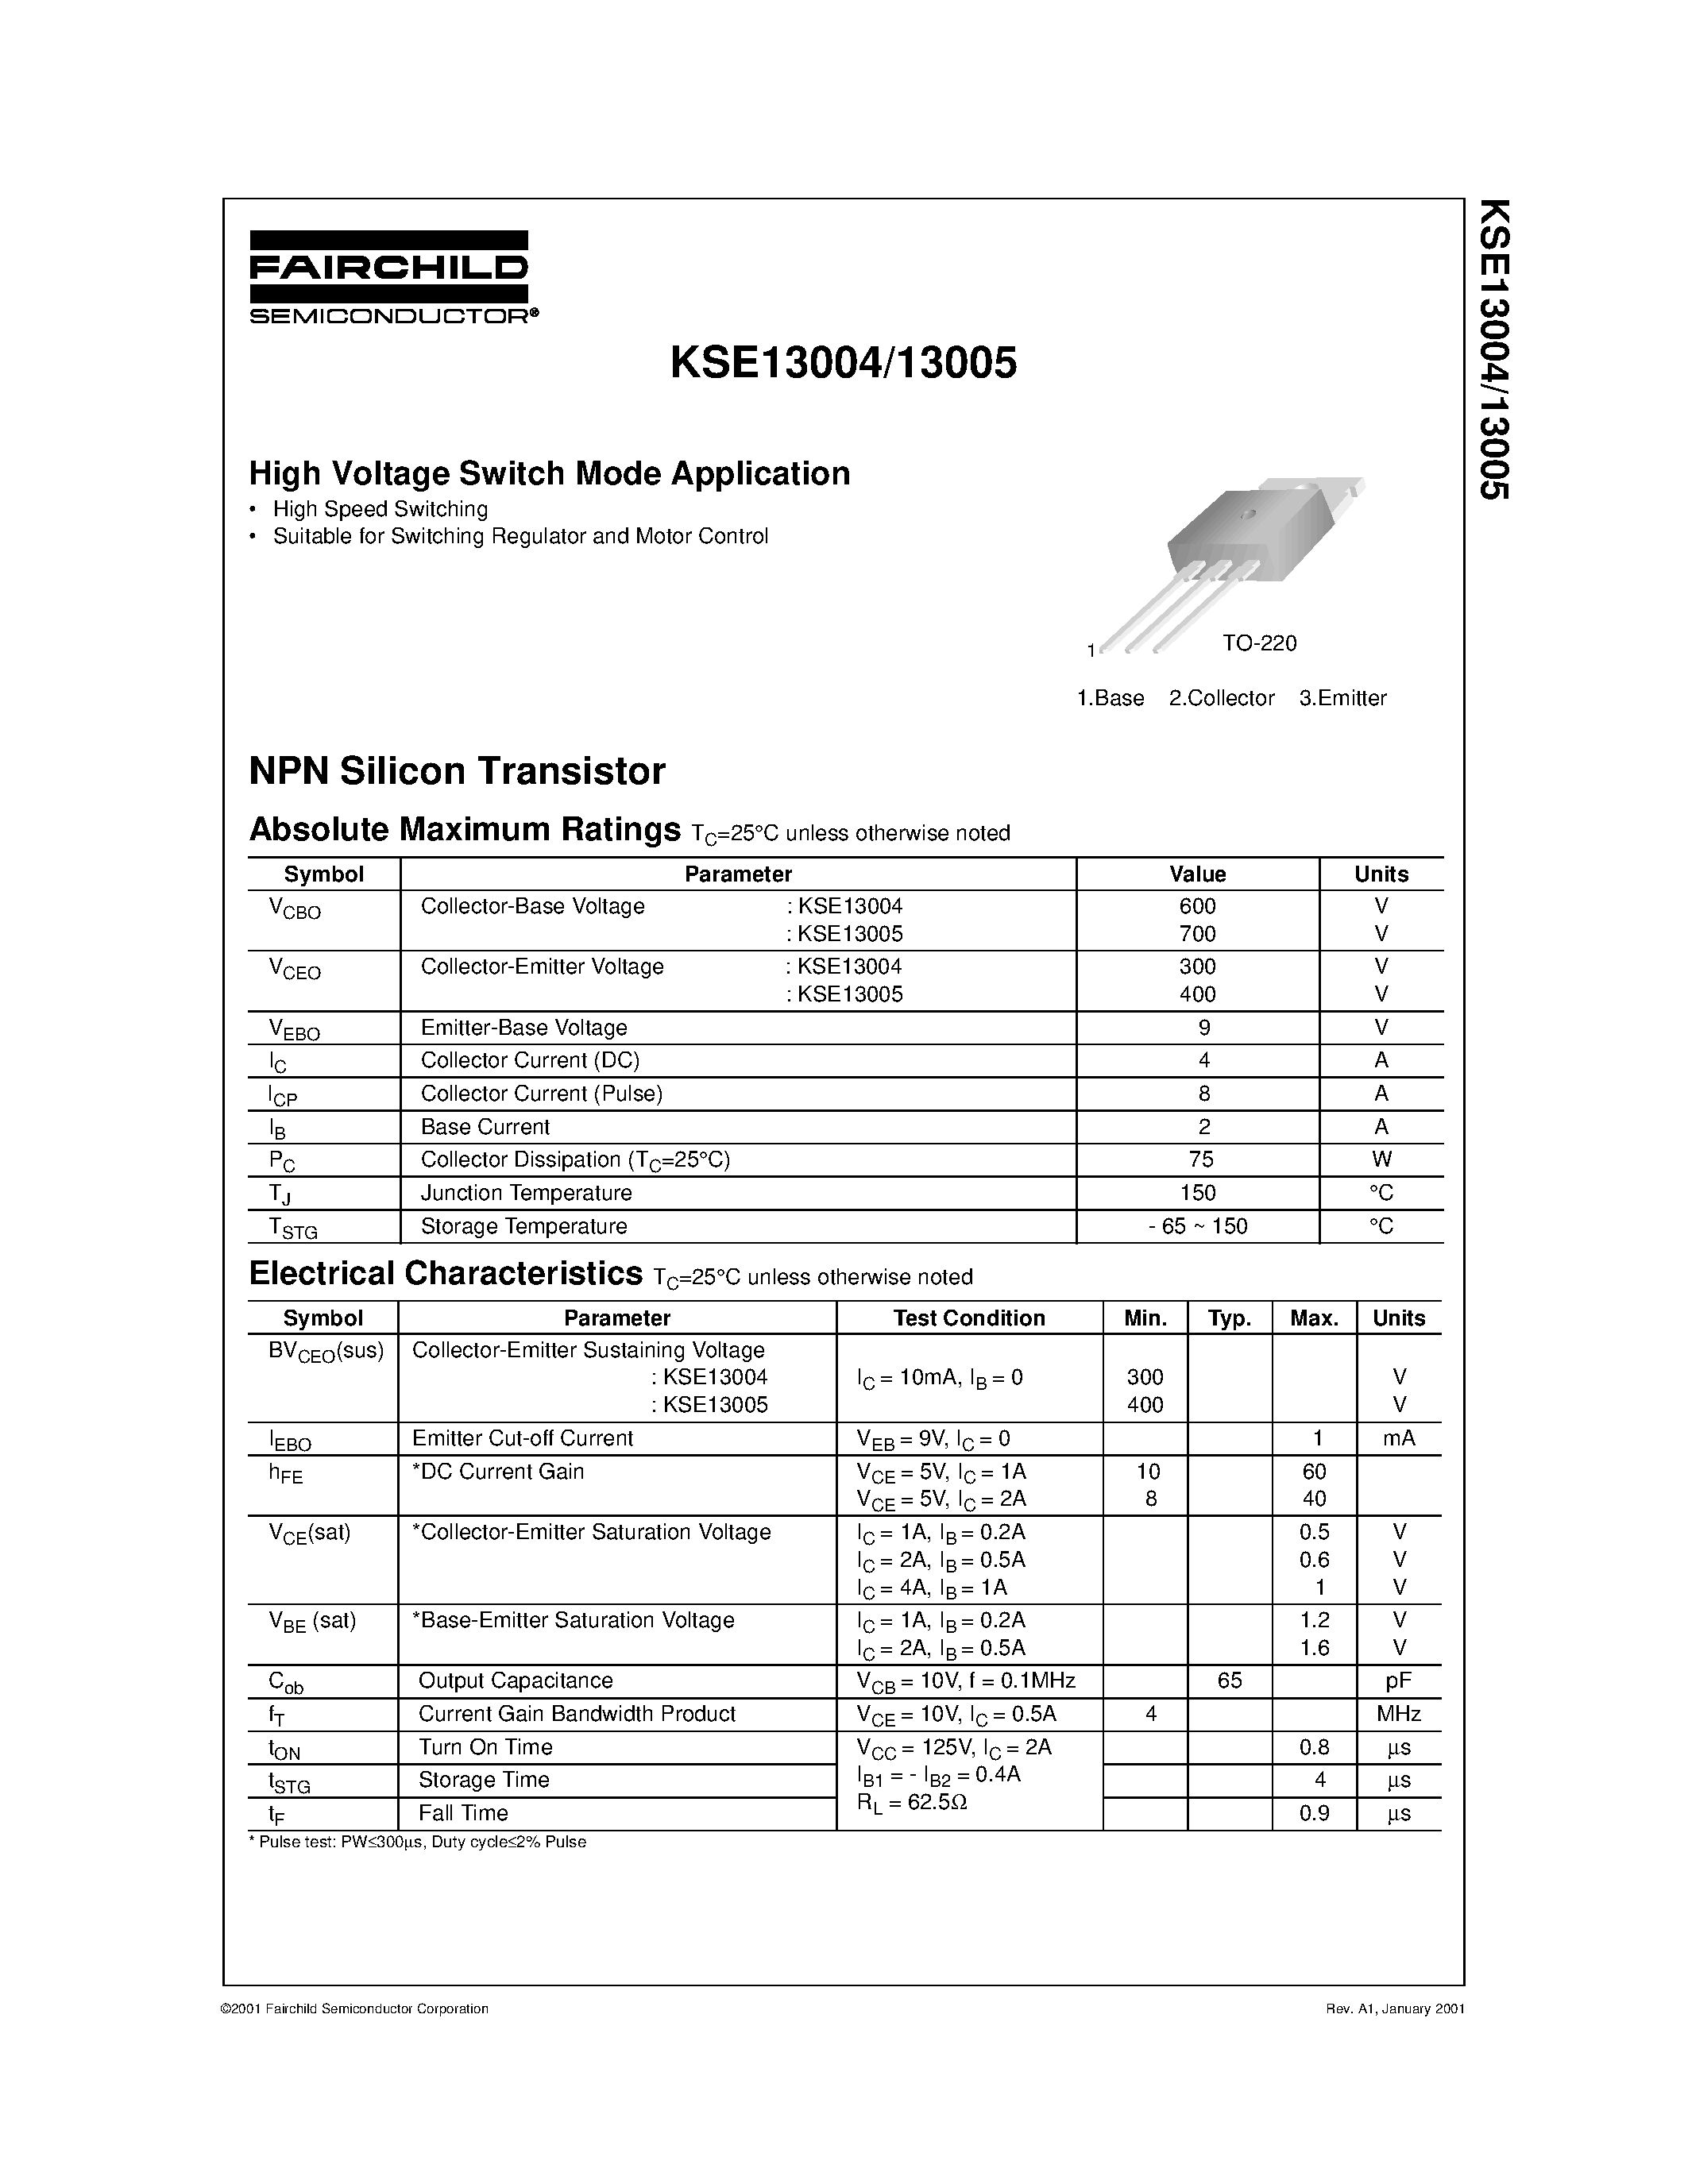 Datasheet KSE13004 - High Voltage Switch Mode Application page 1